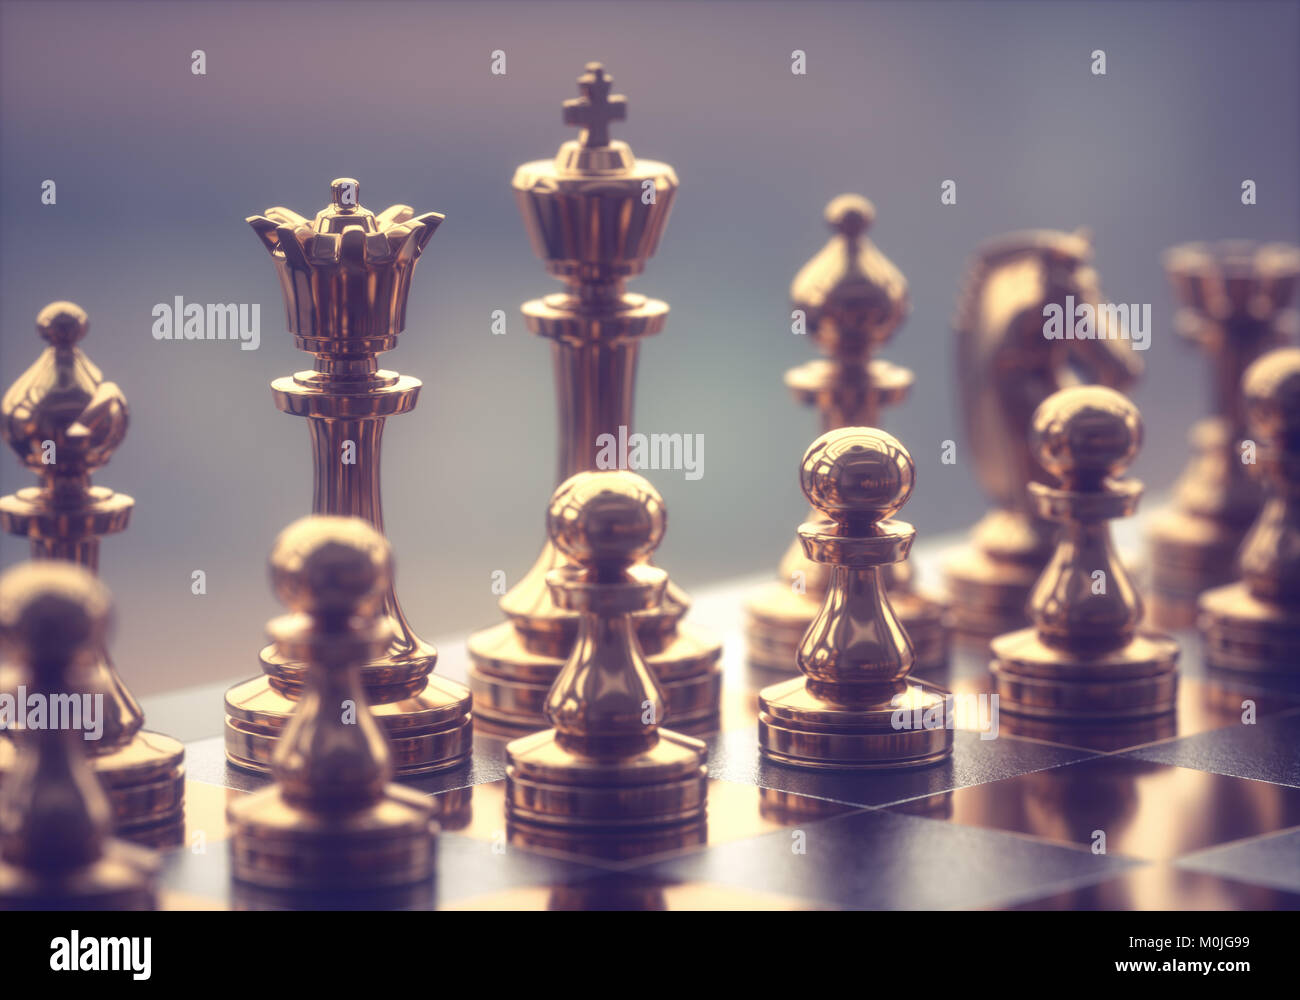 Premium Photo  Gold rook facing the opponent on silver side chess pieces  for competition game and tournament match on a chessboard background sport  and leisure activity concept 3d illustration rendering